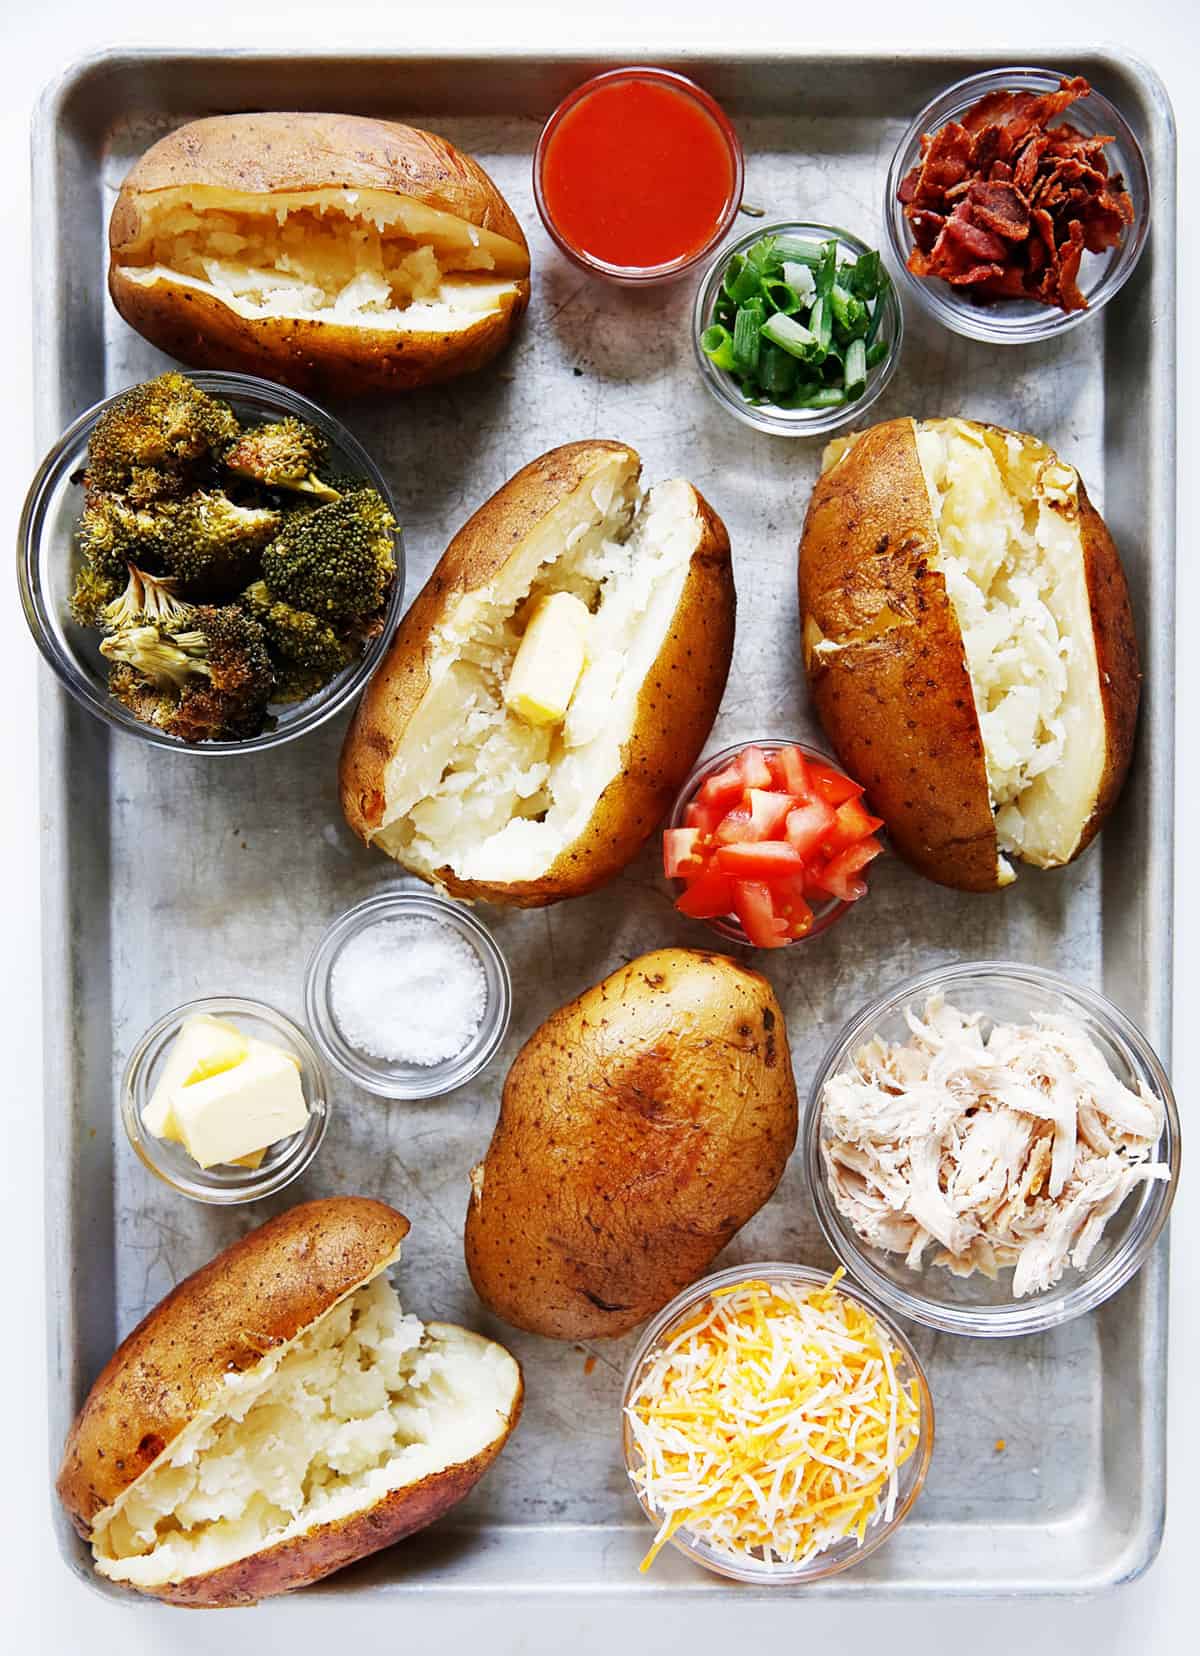 Baked Potato Bar with topping ideas